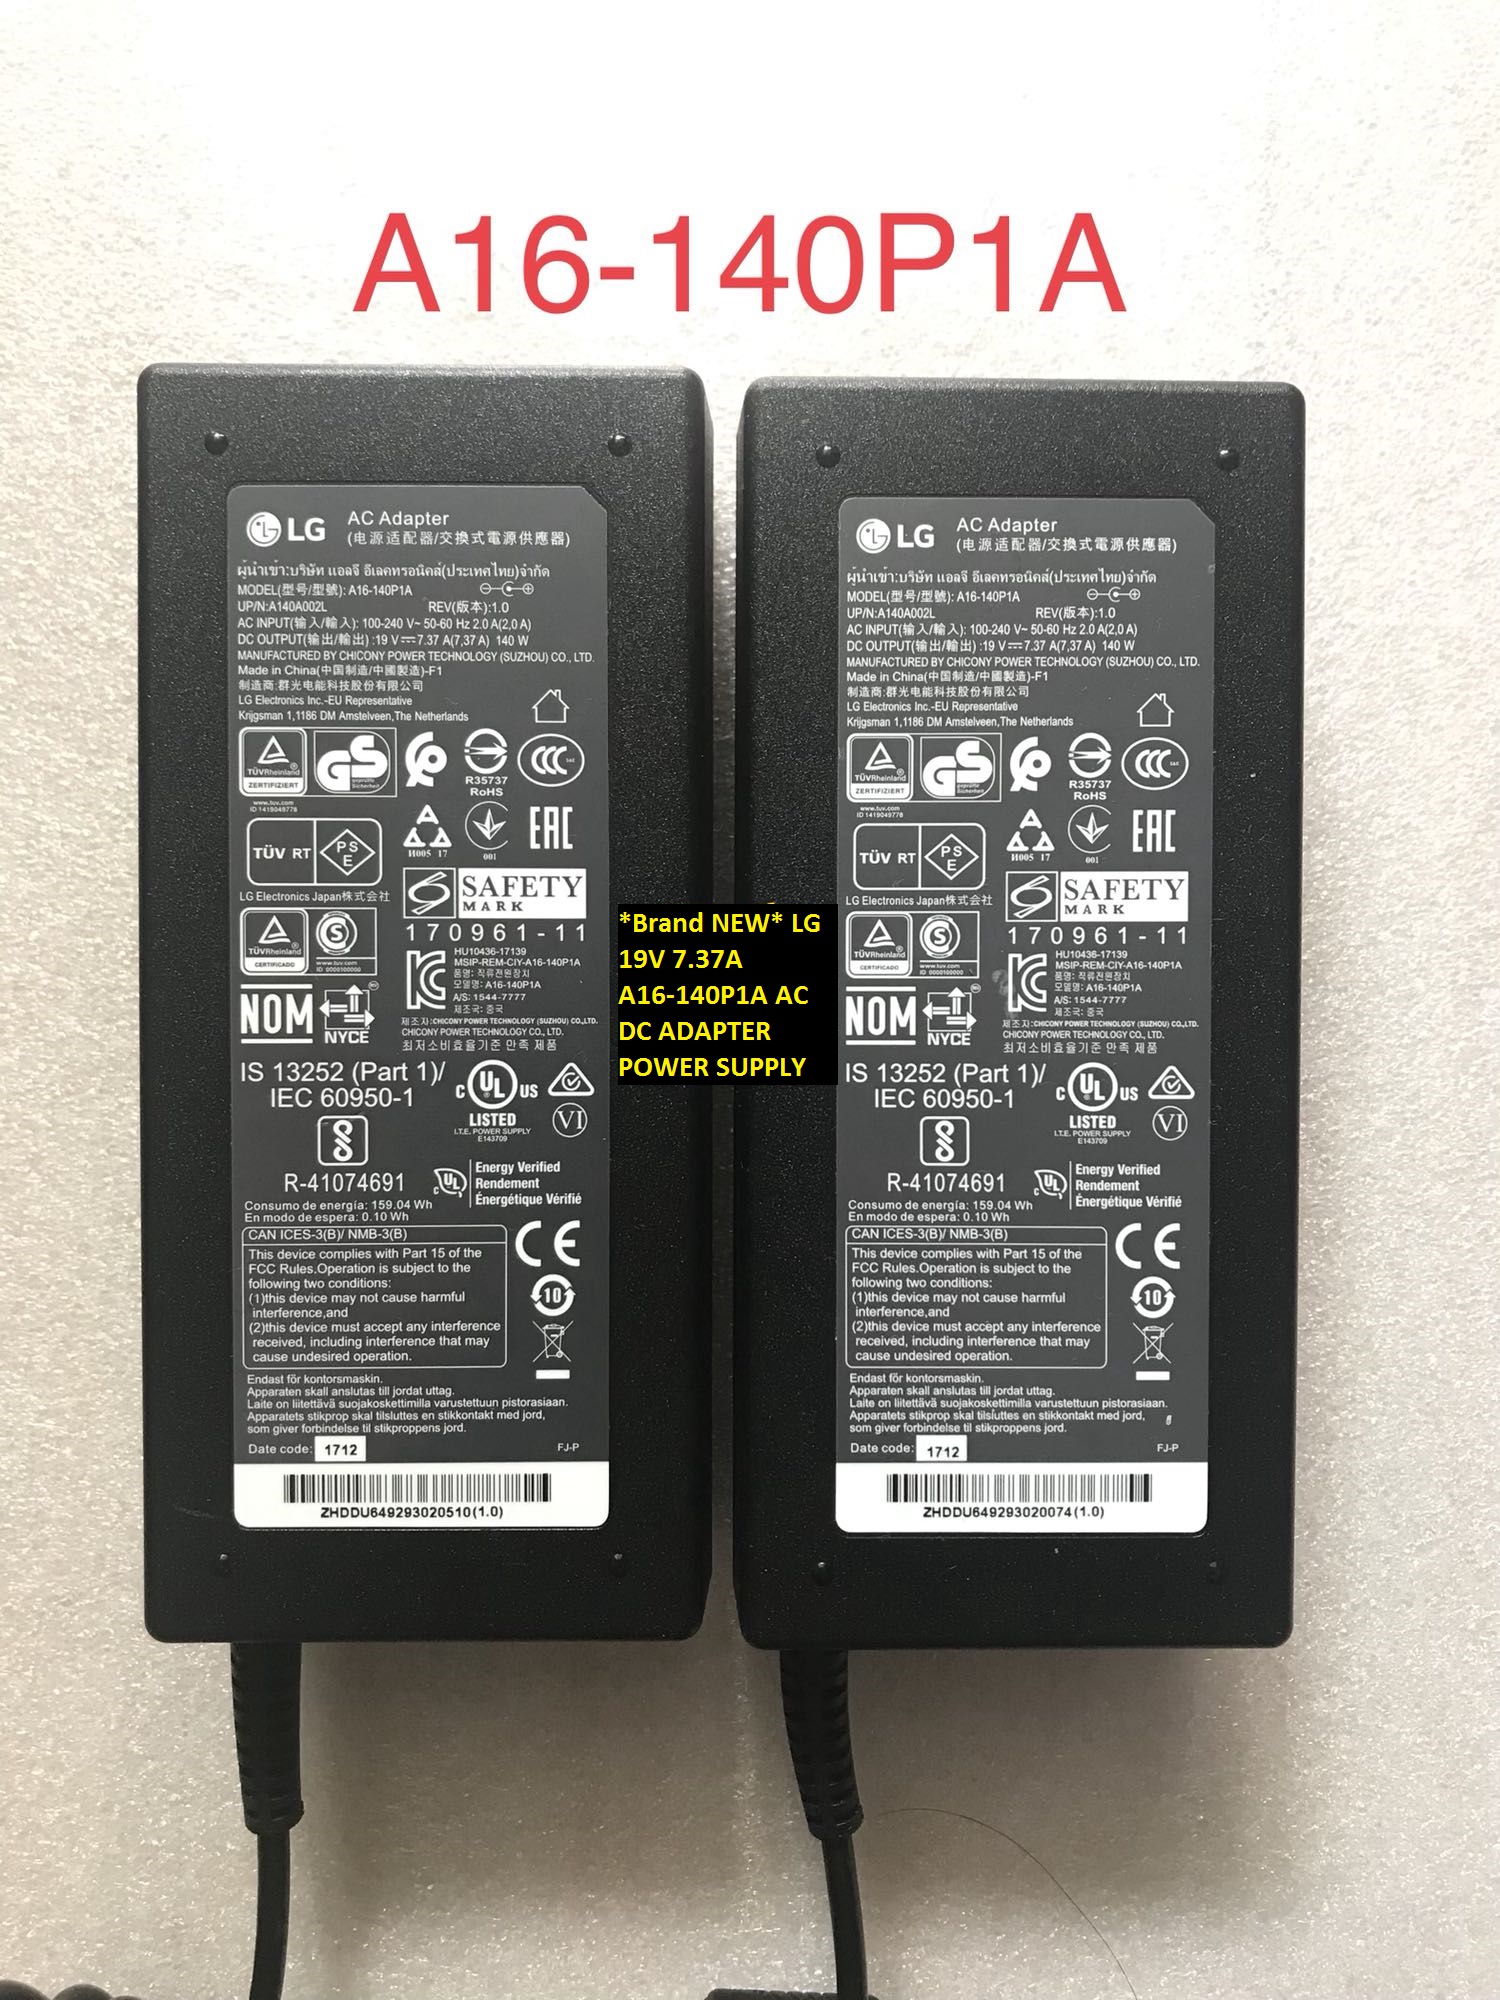 *Brand NEW* 19V 7.37A LG A16-140P1A AC DC ADAPTER POWER SUPPLY